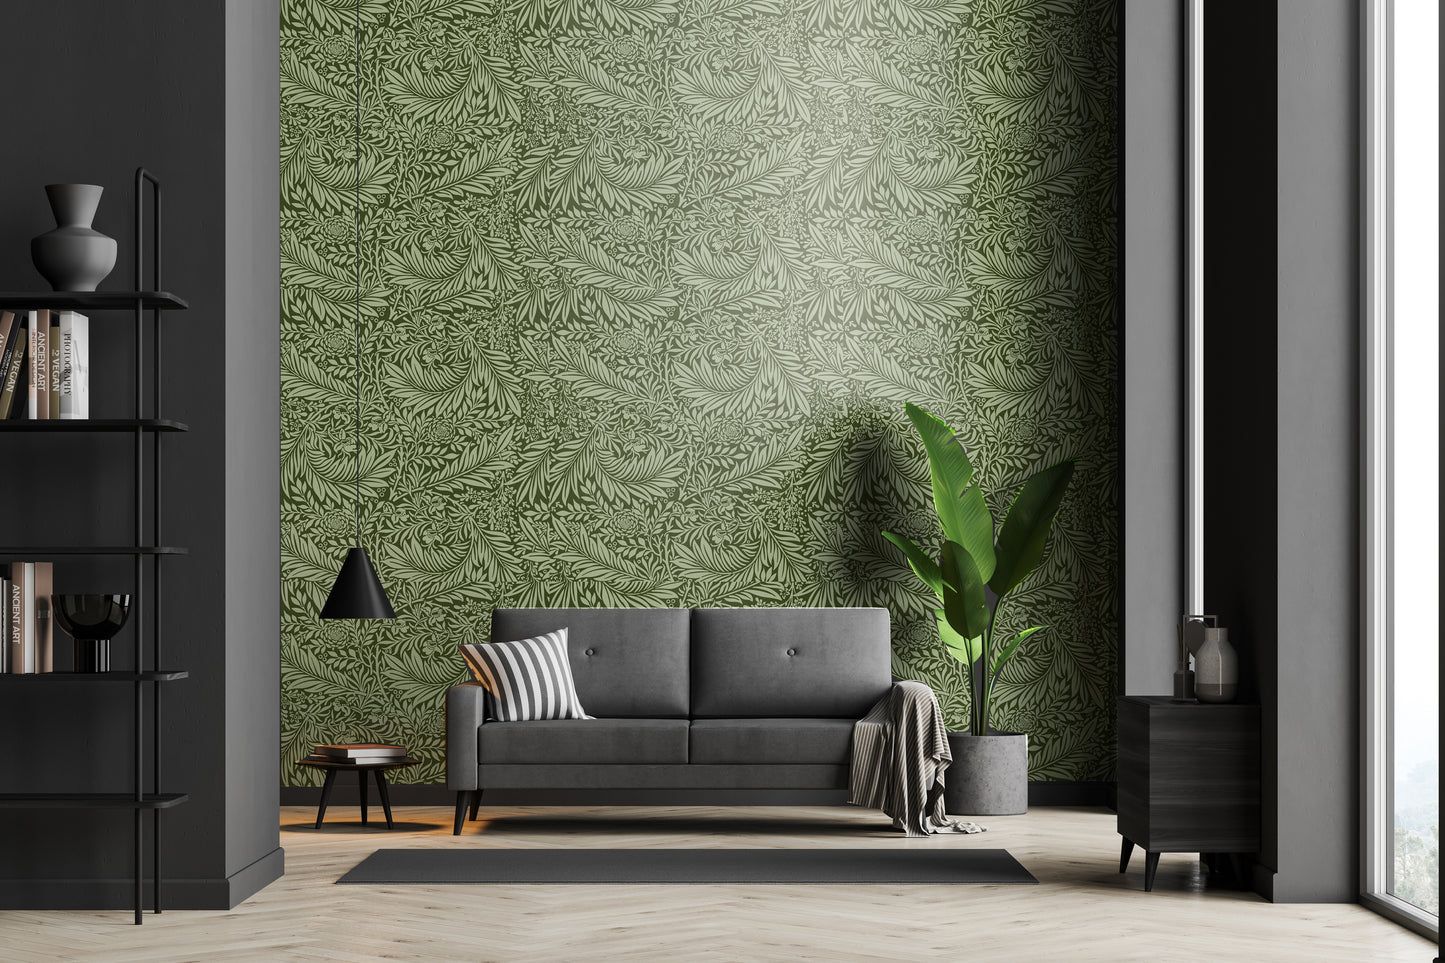 Mossy Mood Removable Peel And Stick Wallpaper